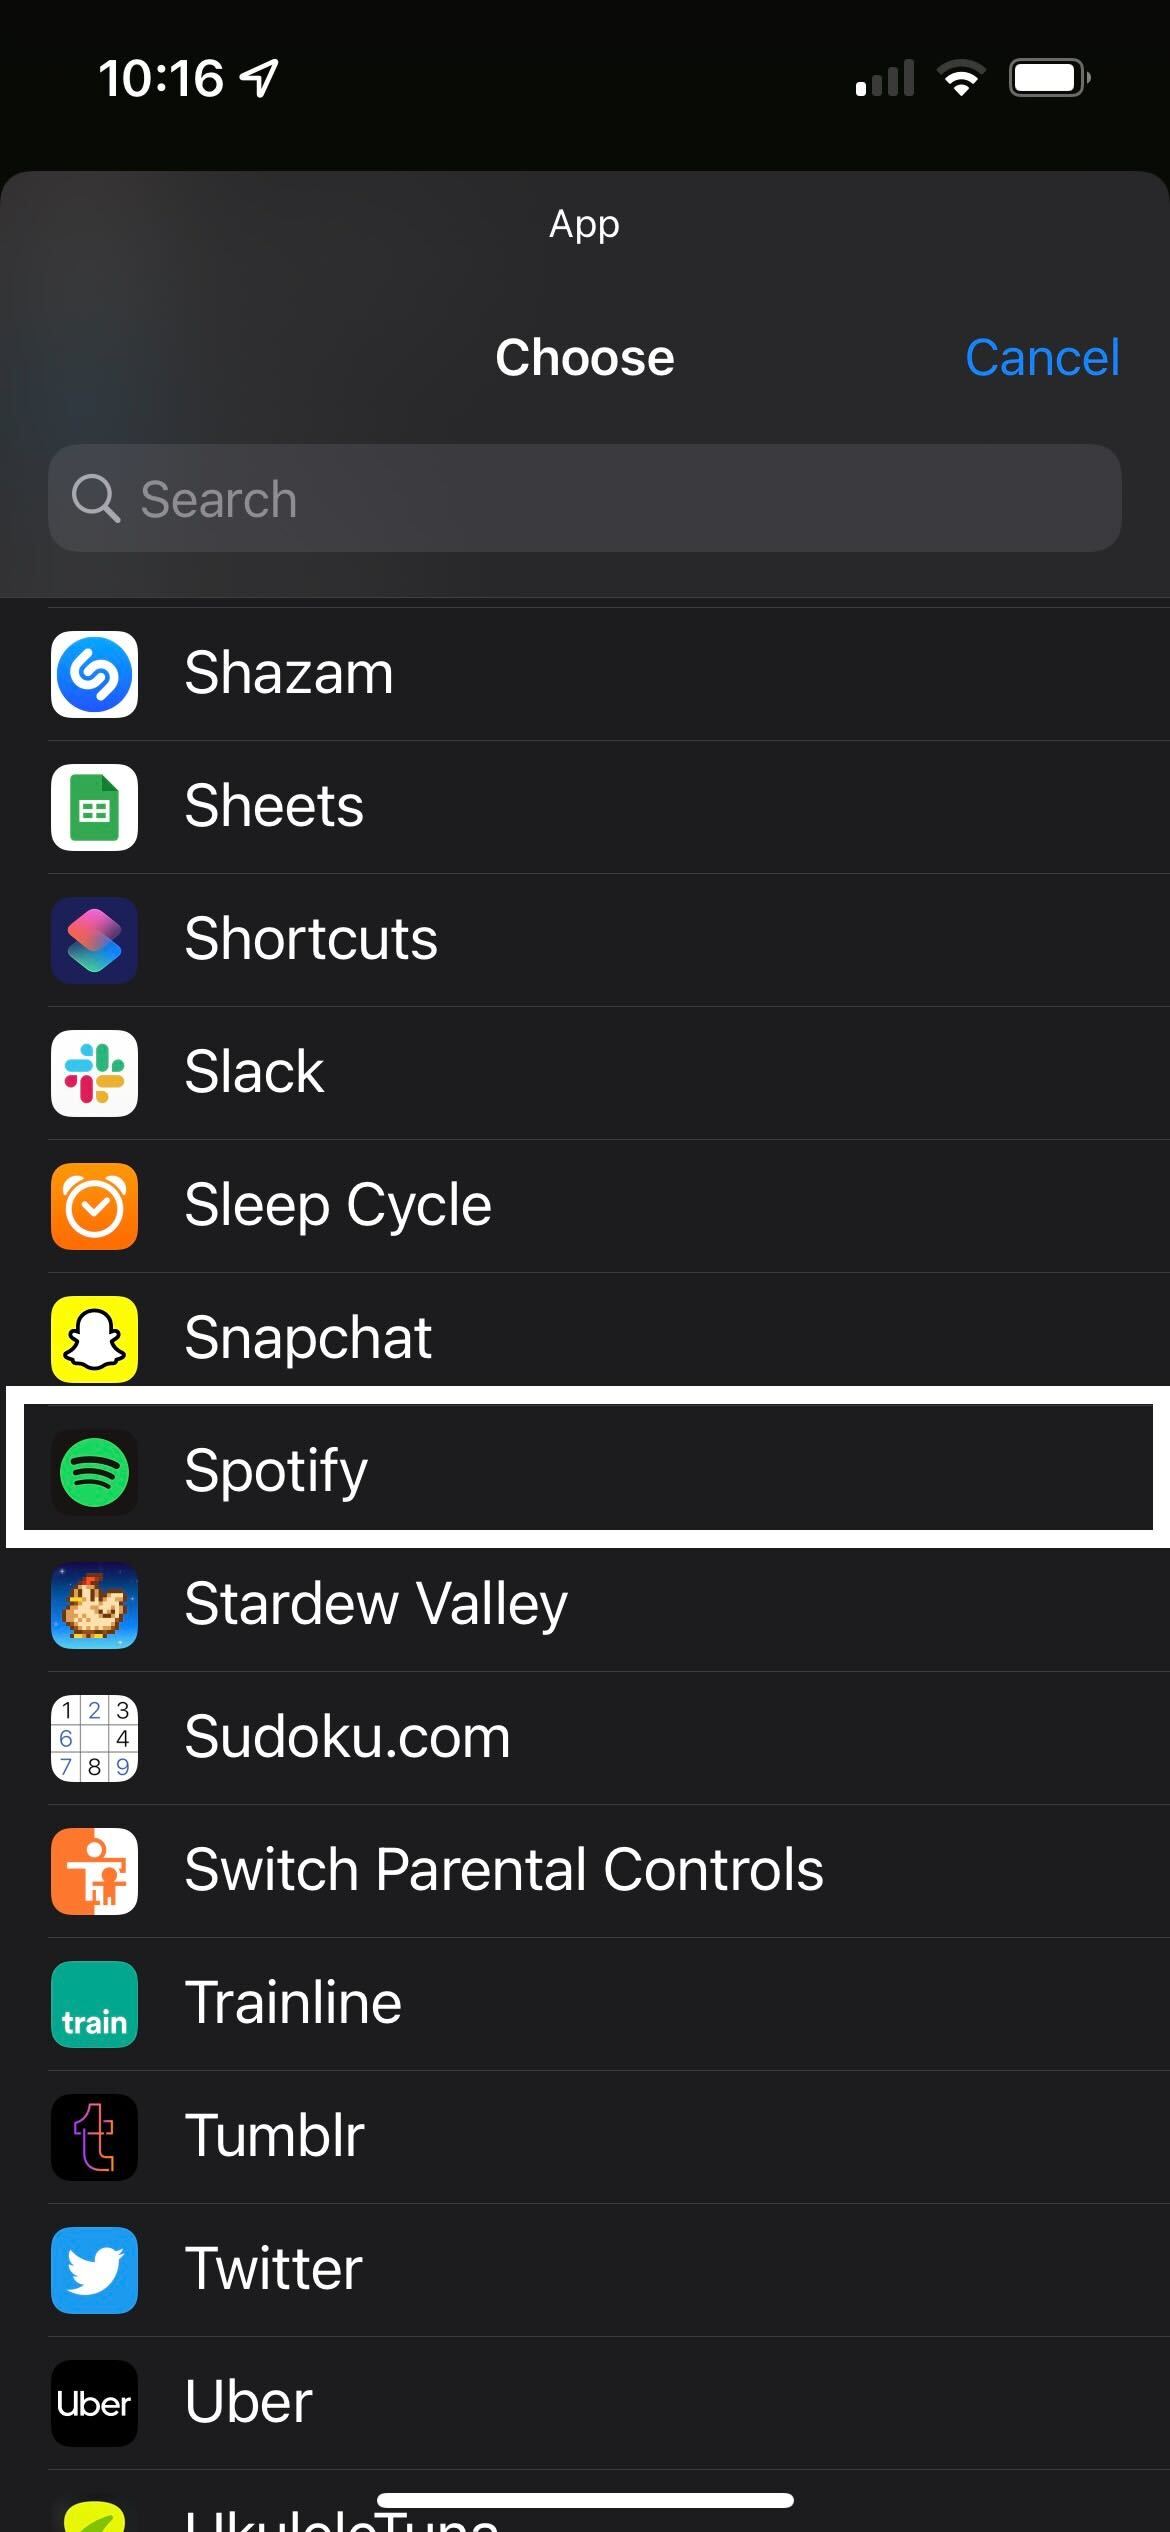 The app page on Shortcuts on iOS